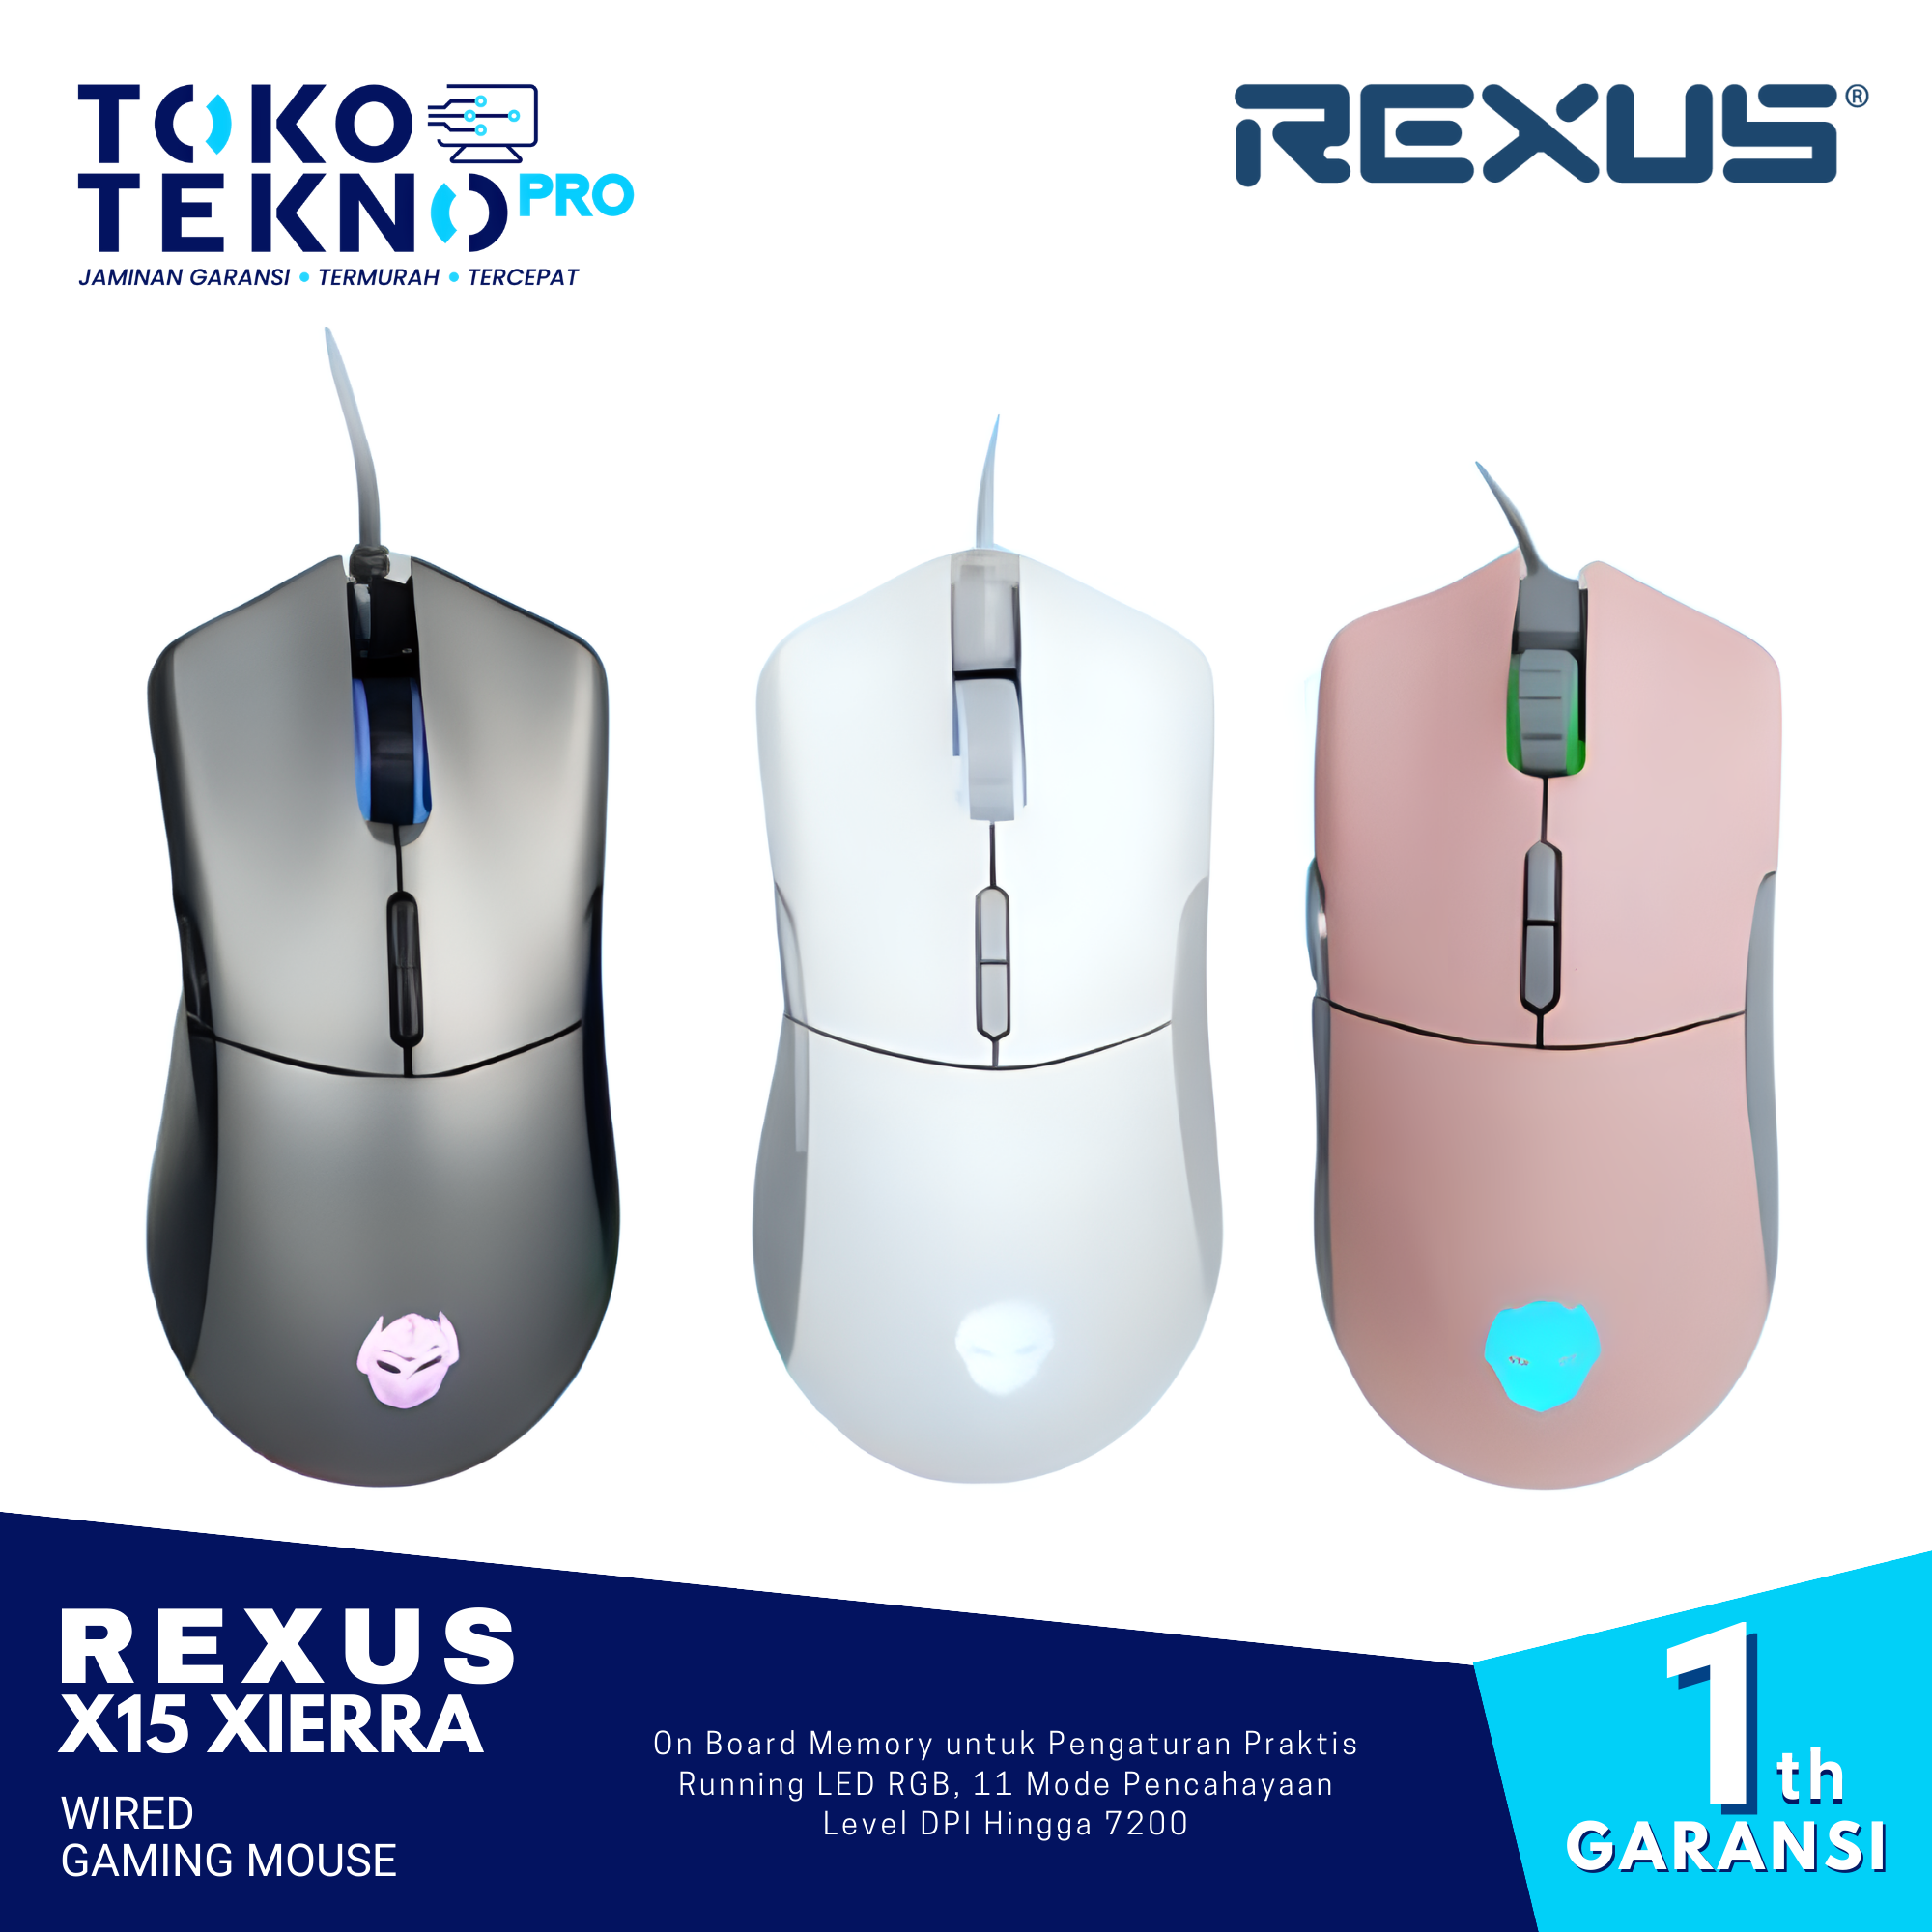 Rexus X15 Xierra Wired Gaming Mouse